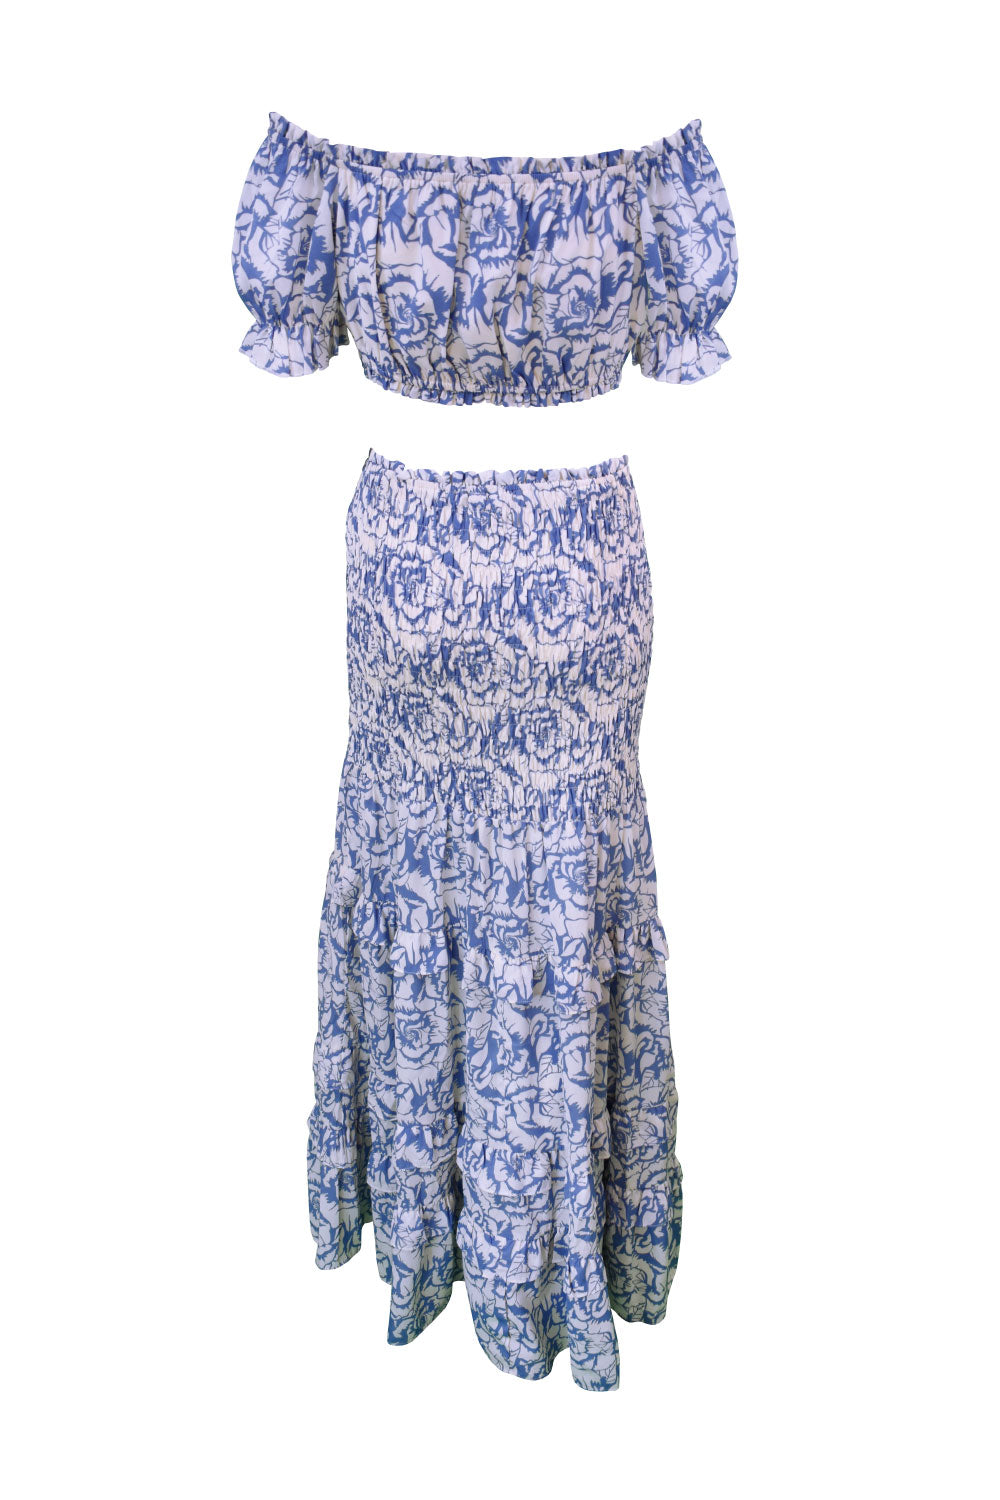 Image of the back of Alfredo Barraza's Blue Roses Two Piece Skirt Set.